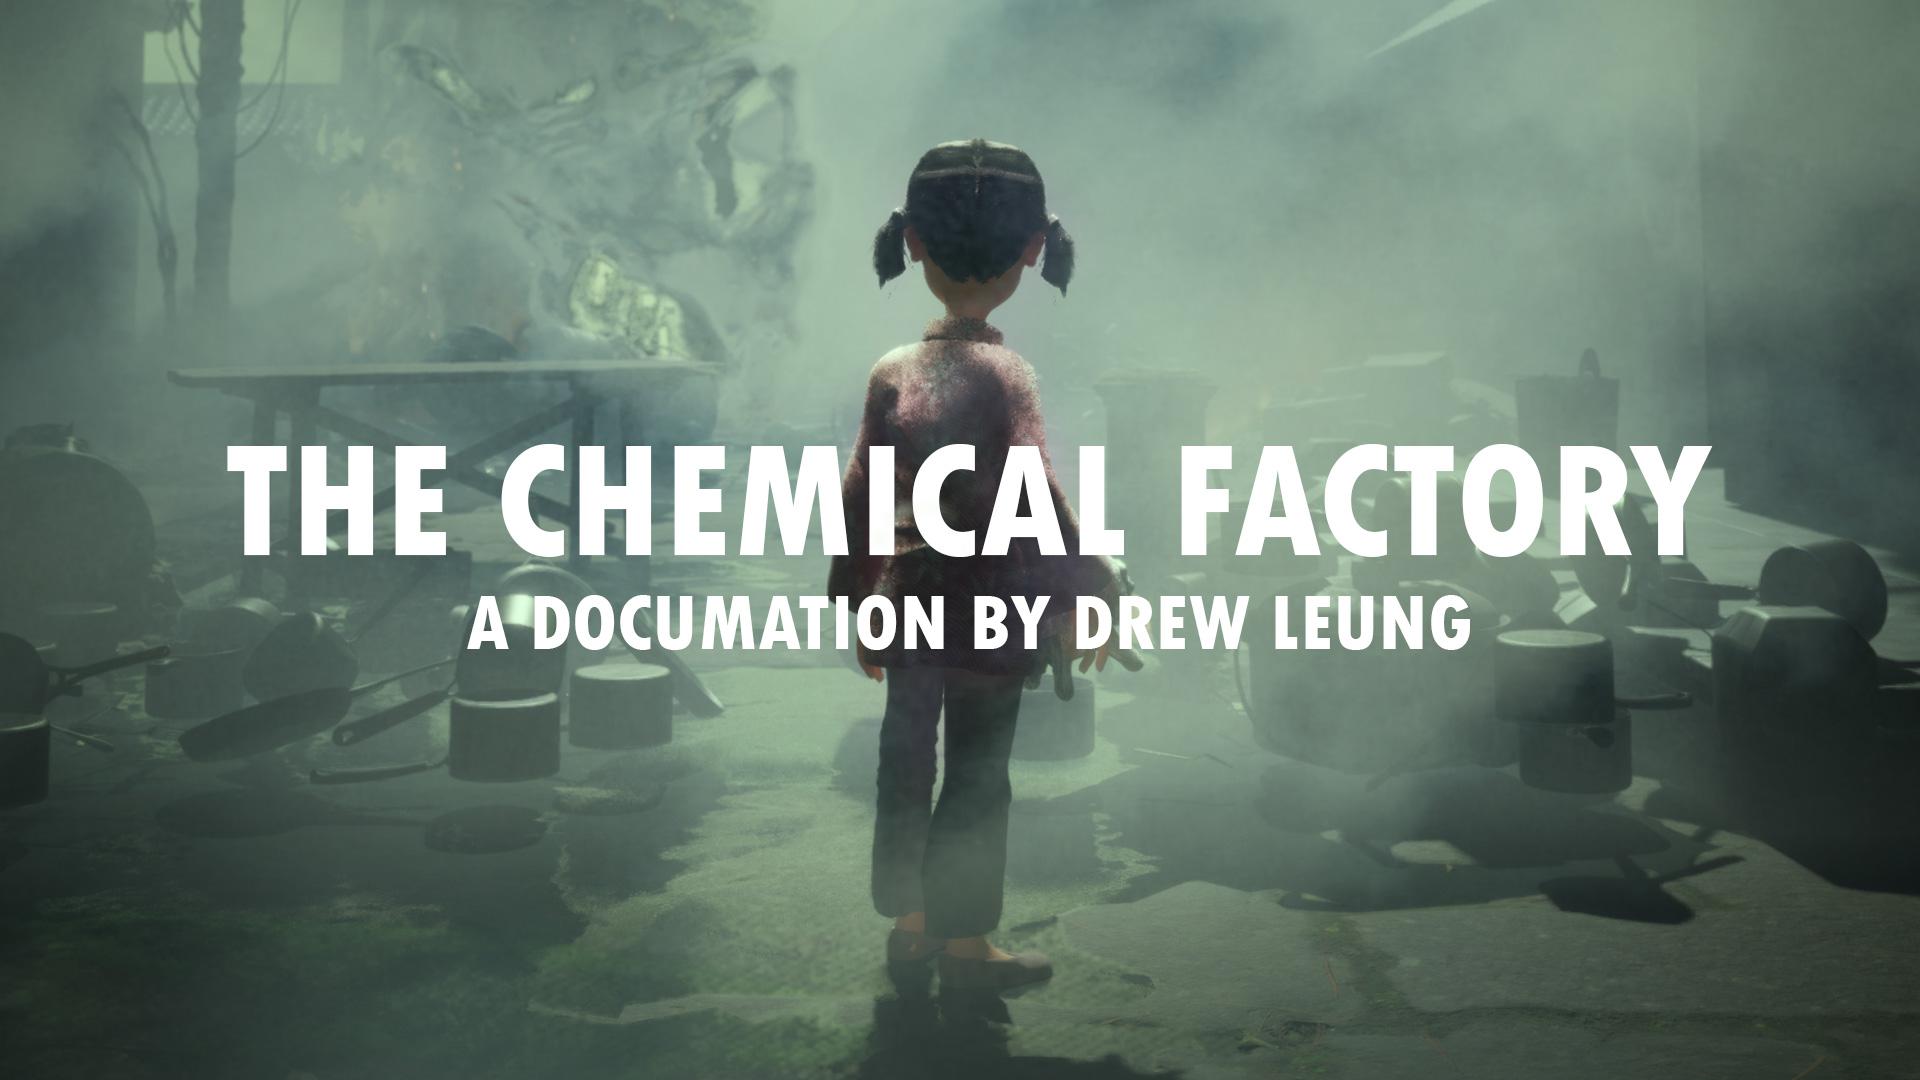 The Chemical Factory